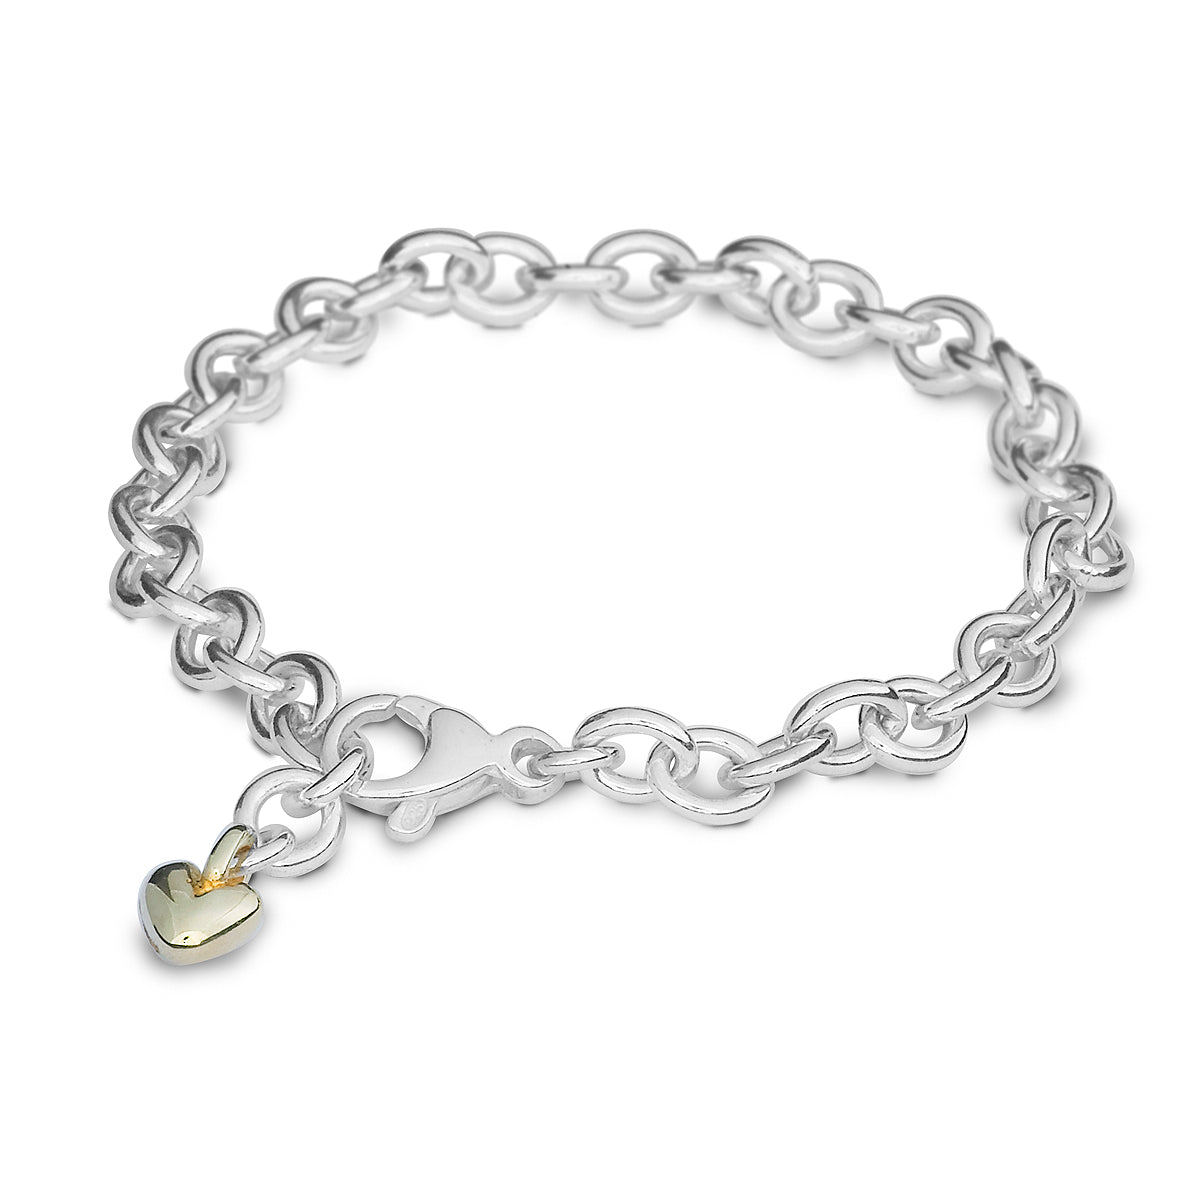 Mini Lifetime fully adjustable solid silver charm bracelet for collecting charms Scarlett Jewellery